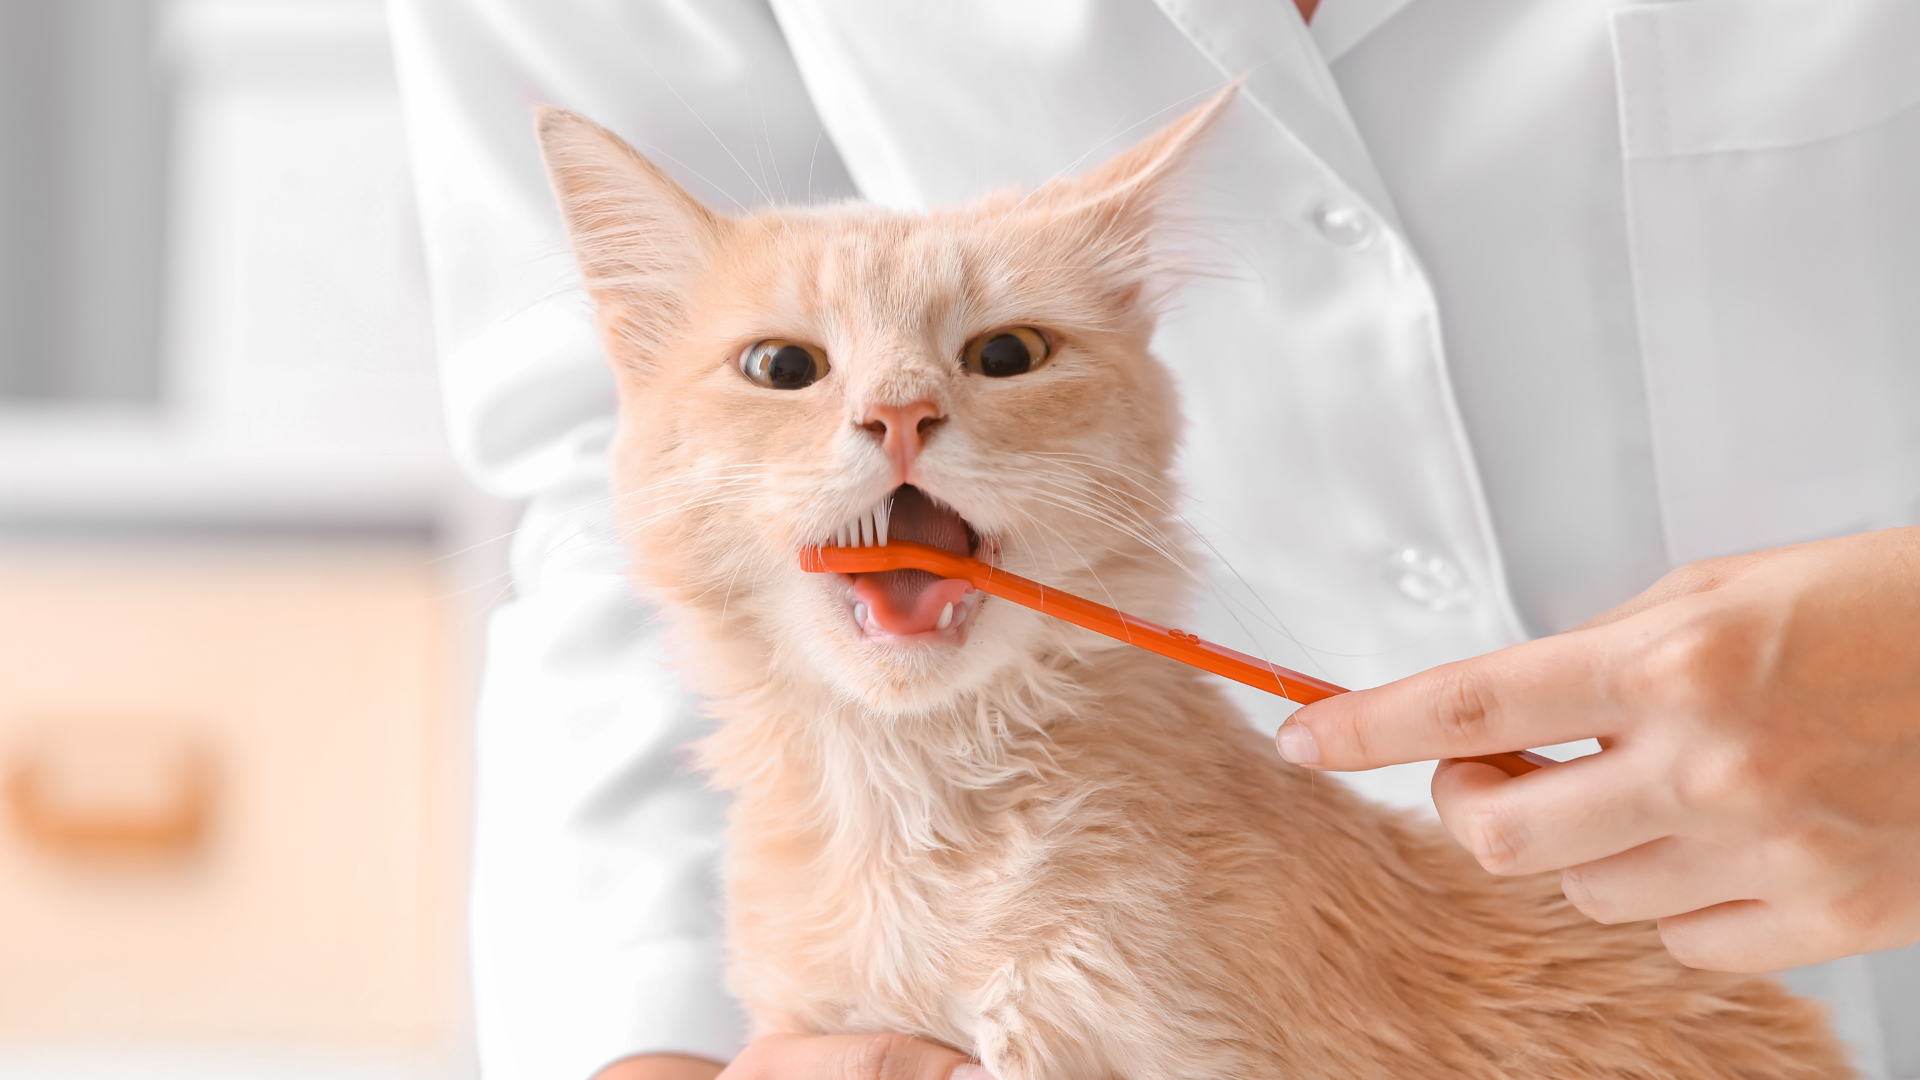 Teeth cleaning of cat